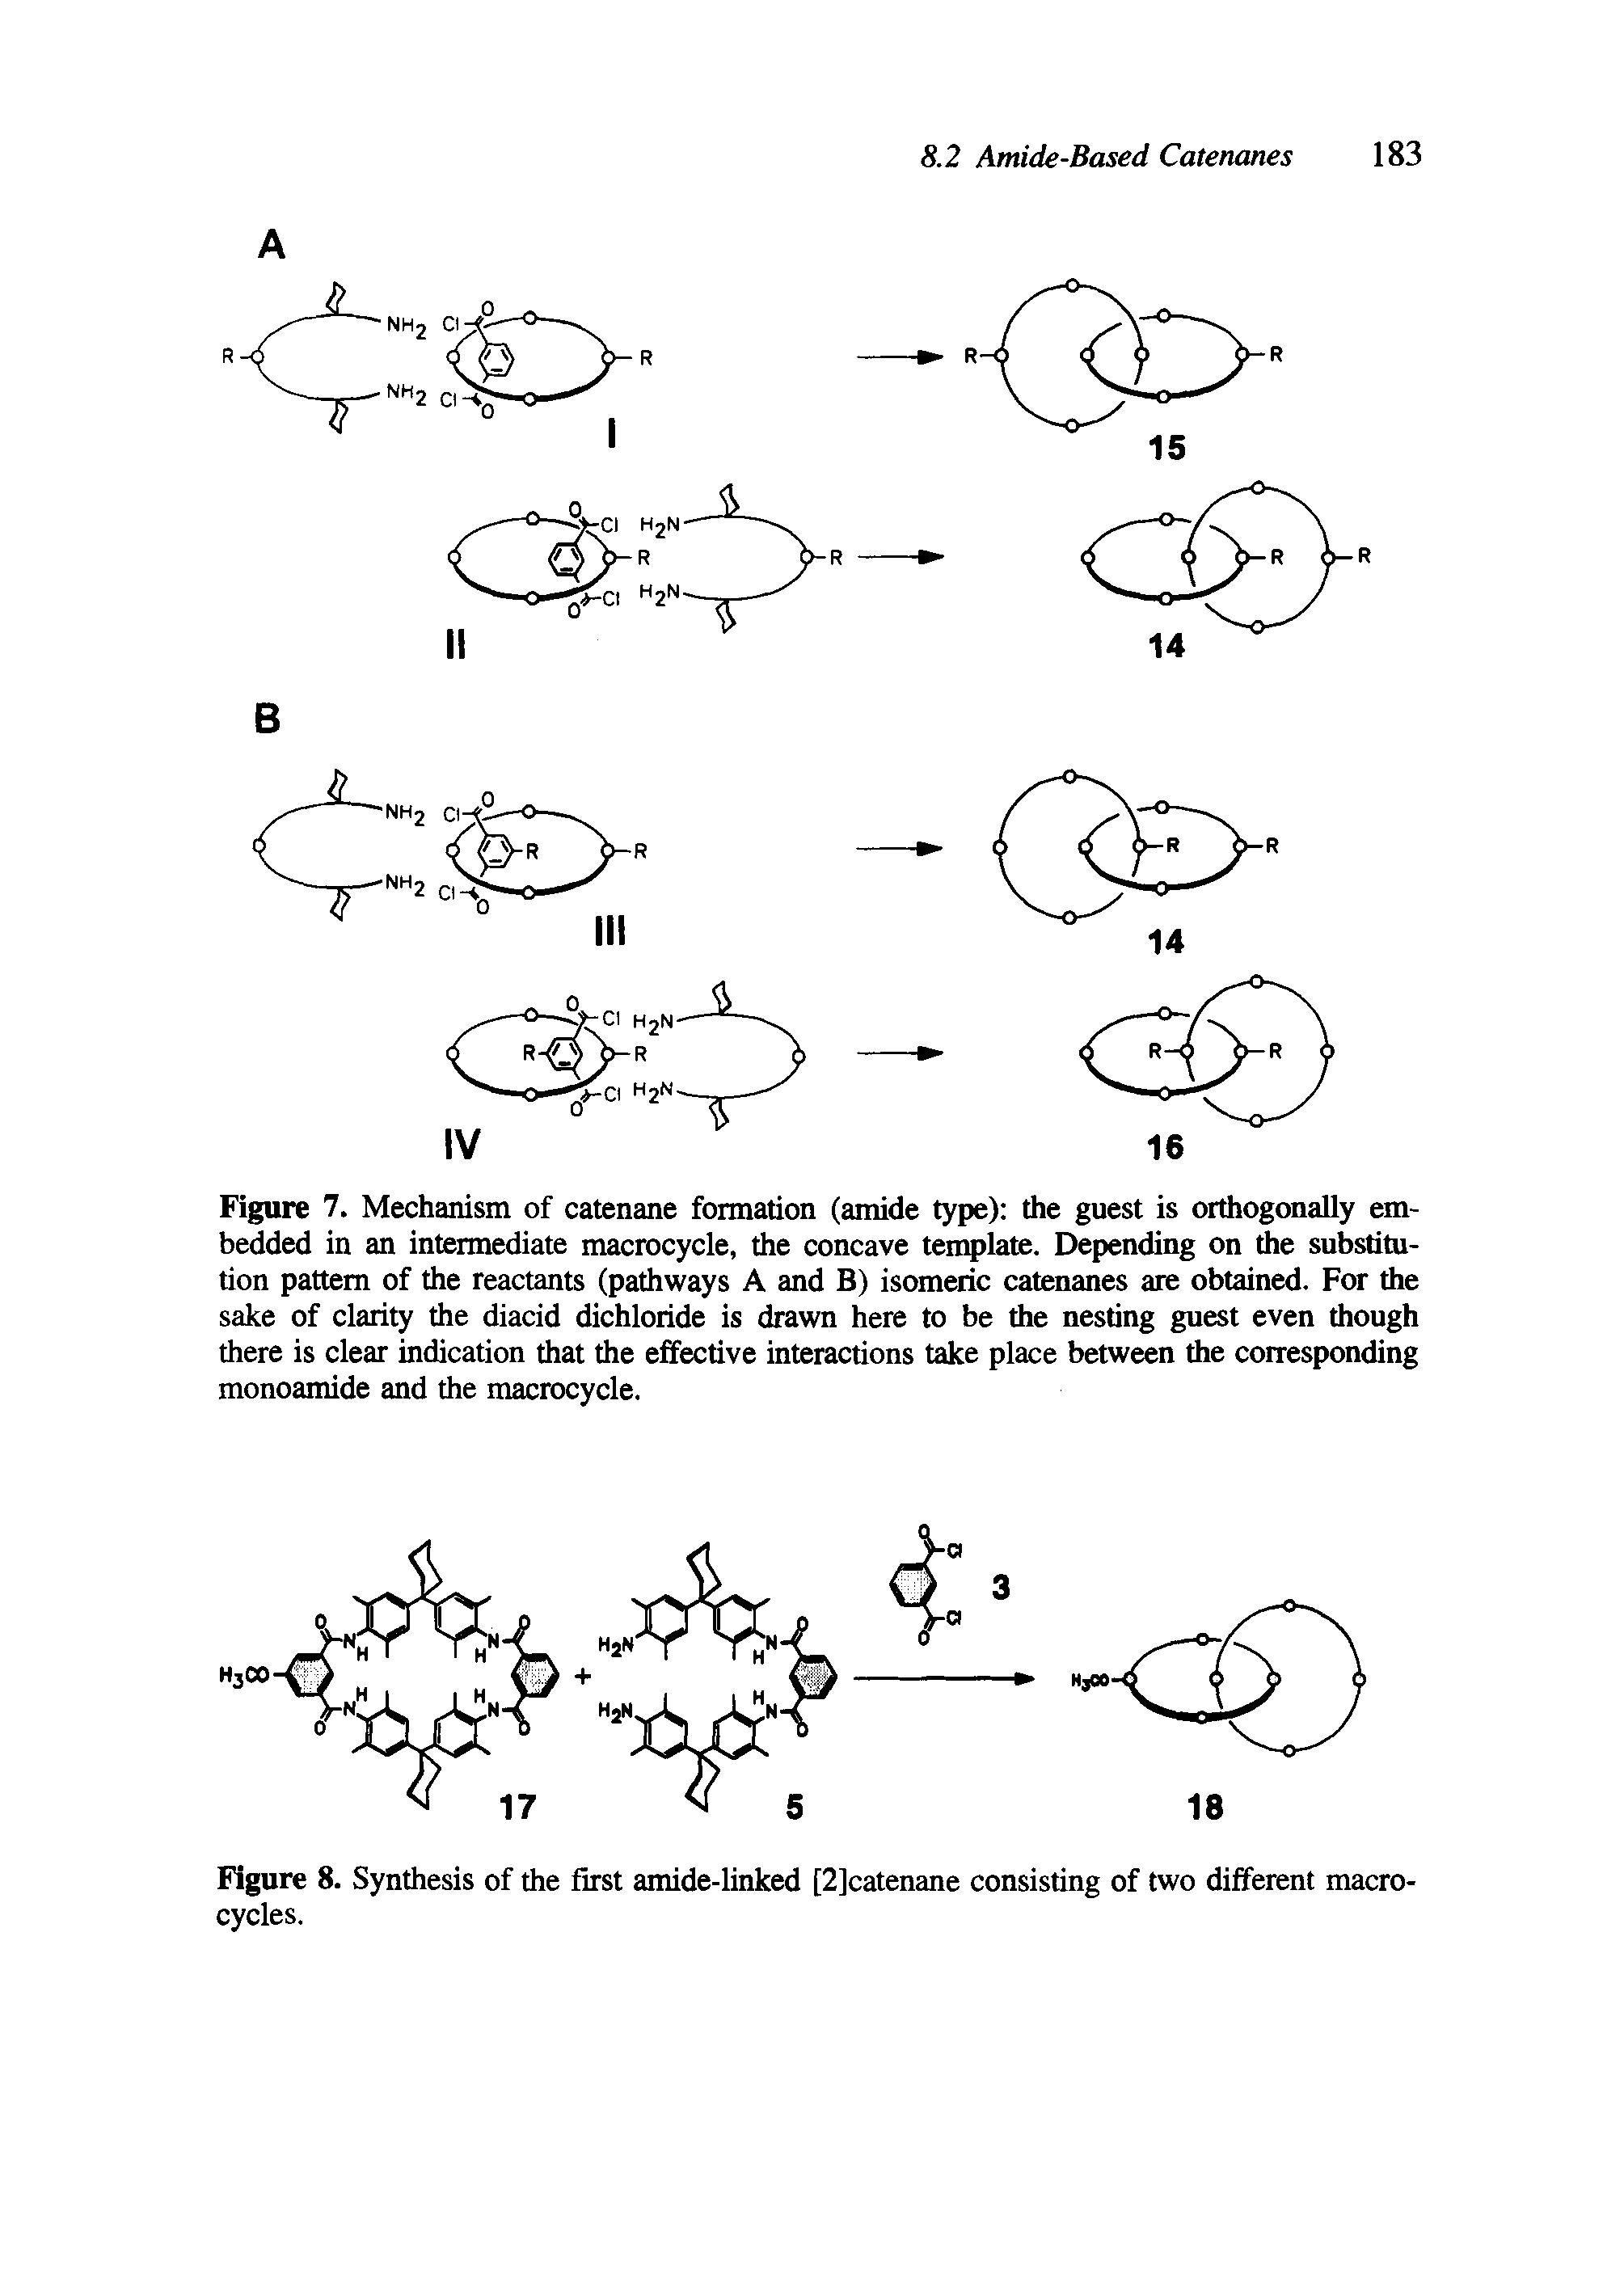 Figure 8. Synthesis of the first amide-linked [2]catenane consisting of two different macrocycles.